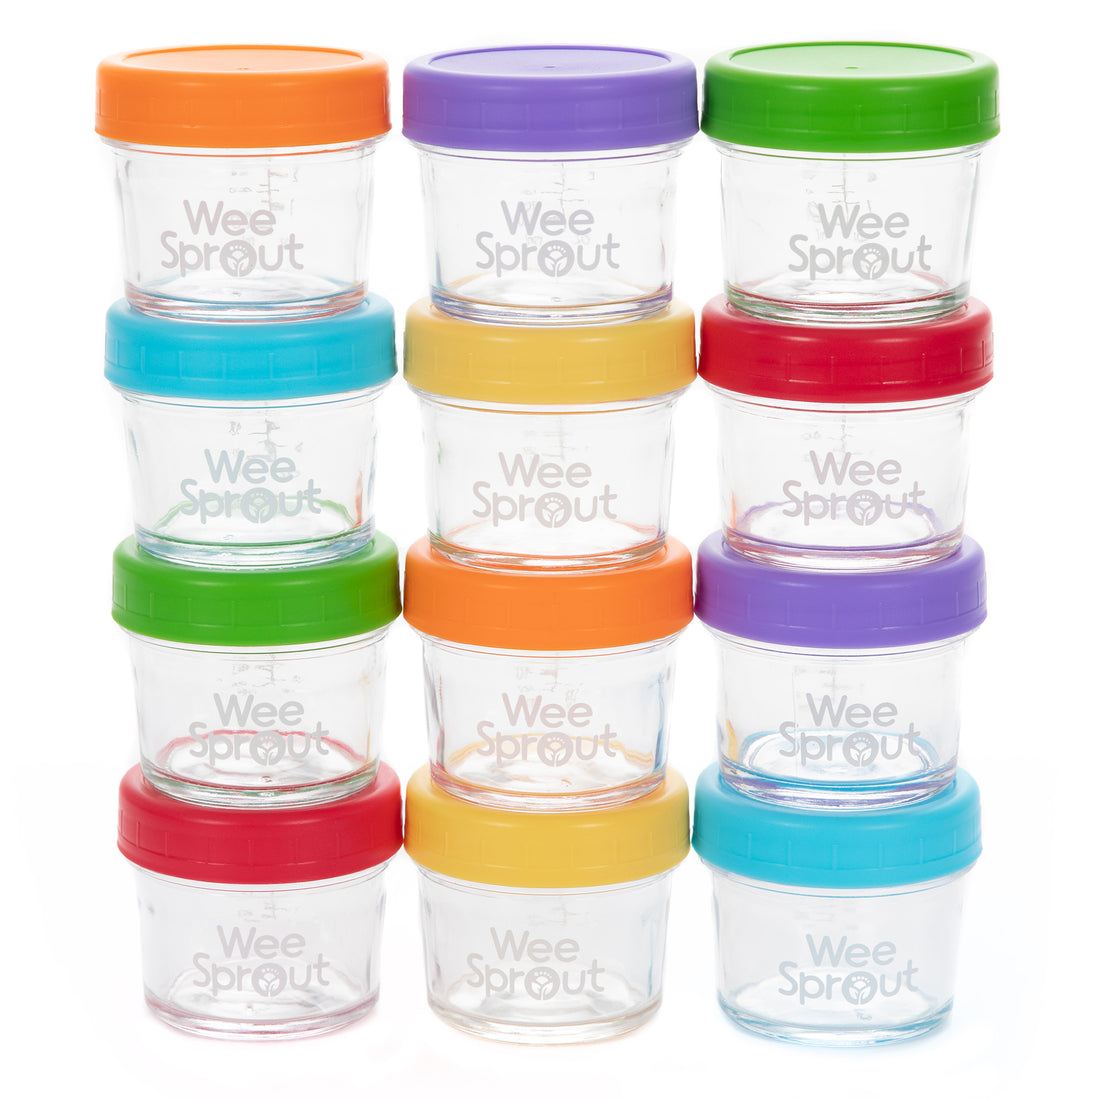 SET OF 9 -- 1 oz Small Plastic Containers Screw On Lids 1 7/8 inch inside  dia.